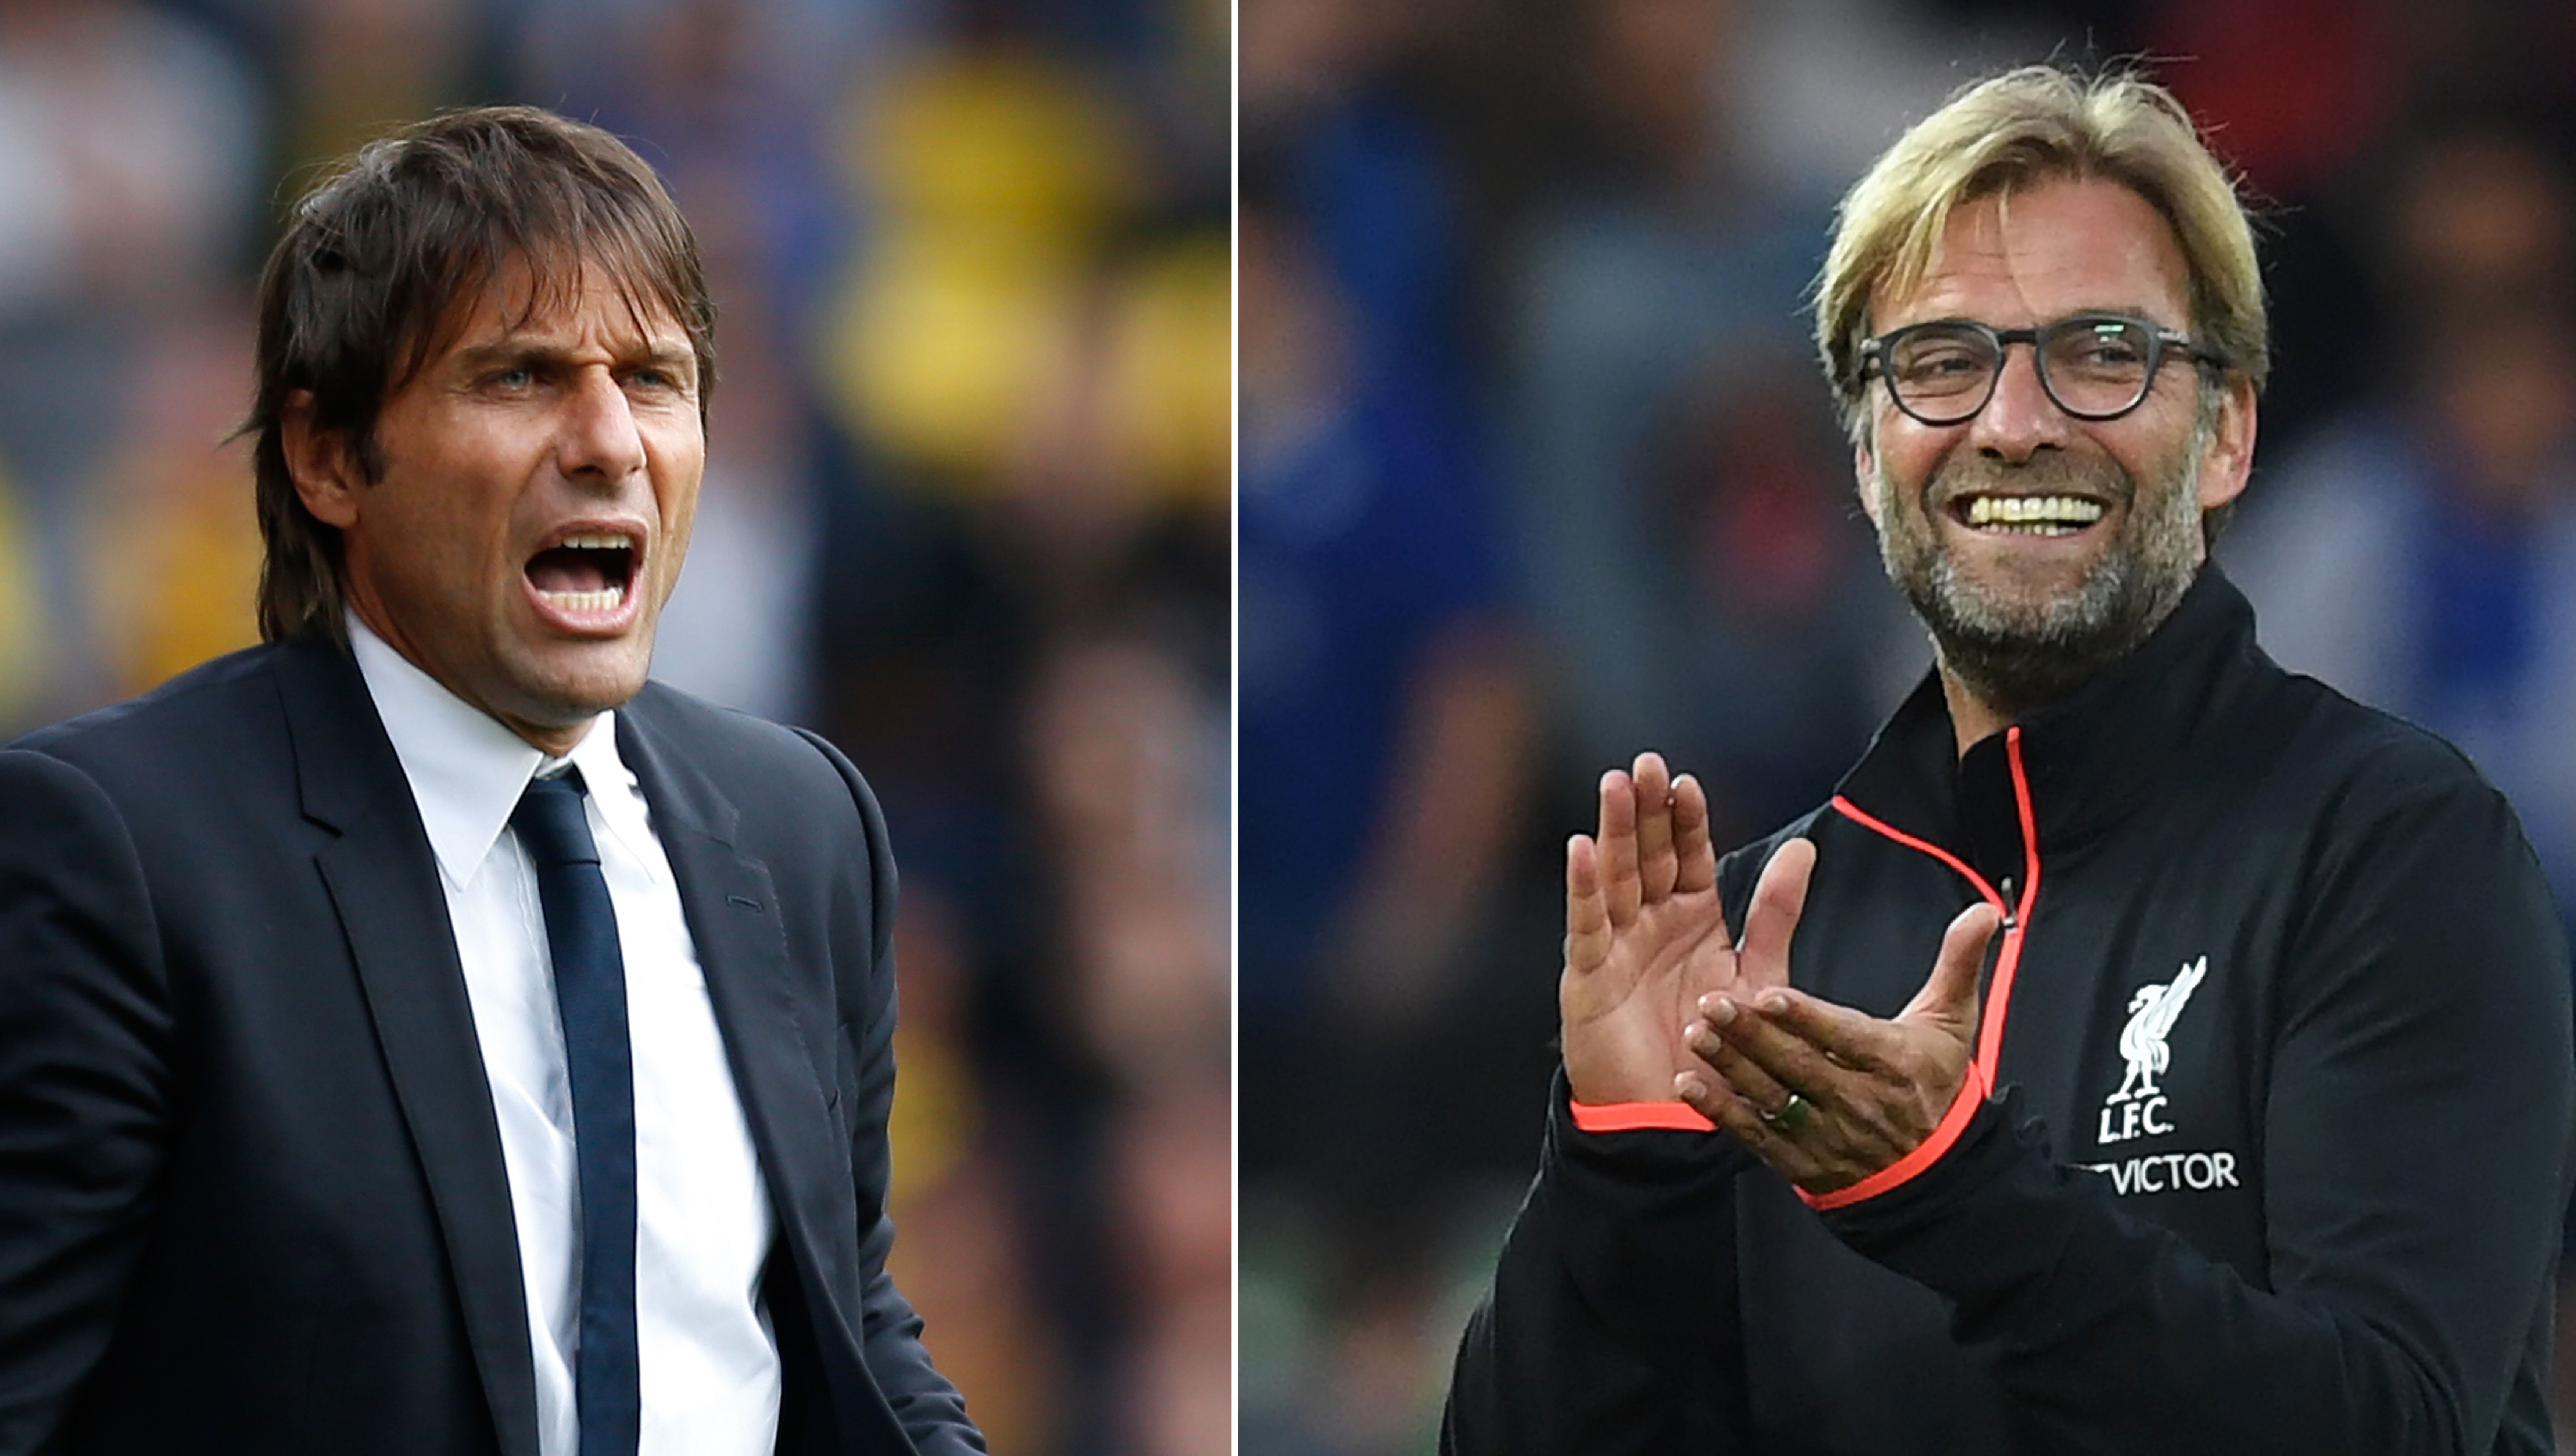 A combo picture shows Chelsea's Italian coach Antonio Conte (L) and Liverpool's German coach Jurgen Klopp. 
Chelsea play Liverpool on September 16, 2016 with two of the Premier league's most vibrant managers meeting for the first time. / AFP / Ian KINGTON        (Photo credit should read IAN KINGTON/AFP/Getty Images)